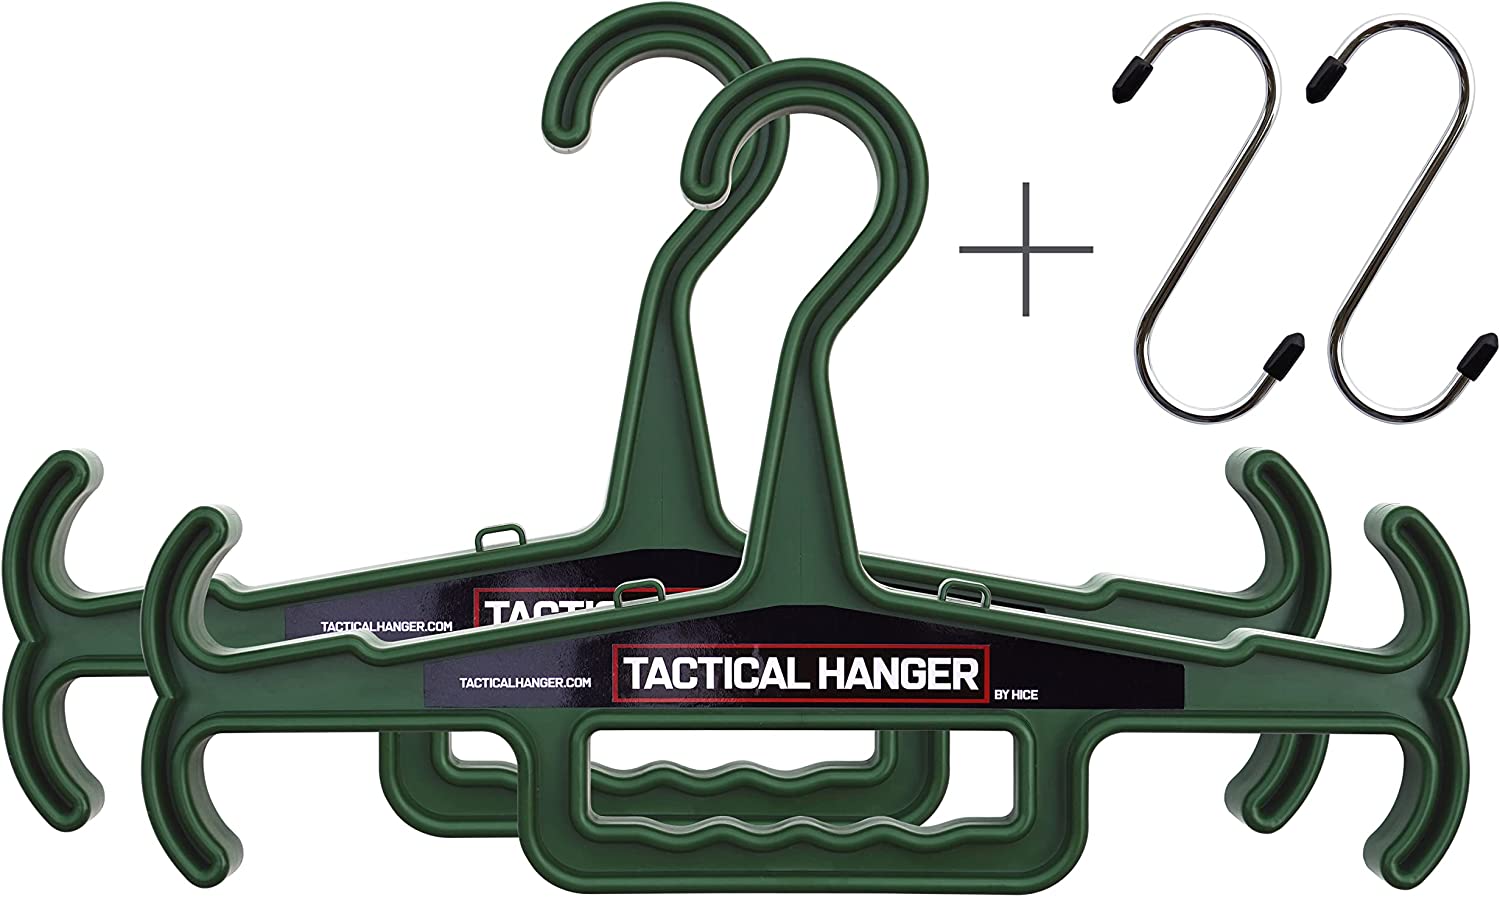 Tactical Hanger by HICE | Set of 2 | Original Heavy Duty Hanger | 200 lb Load Capacity | Durable High Impact Resin | for Body Armor, Police Gear, Military Gear, Survival Gear, Scuba, Equipment (Green)